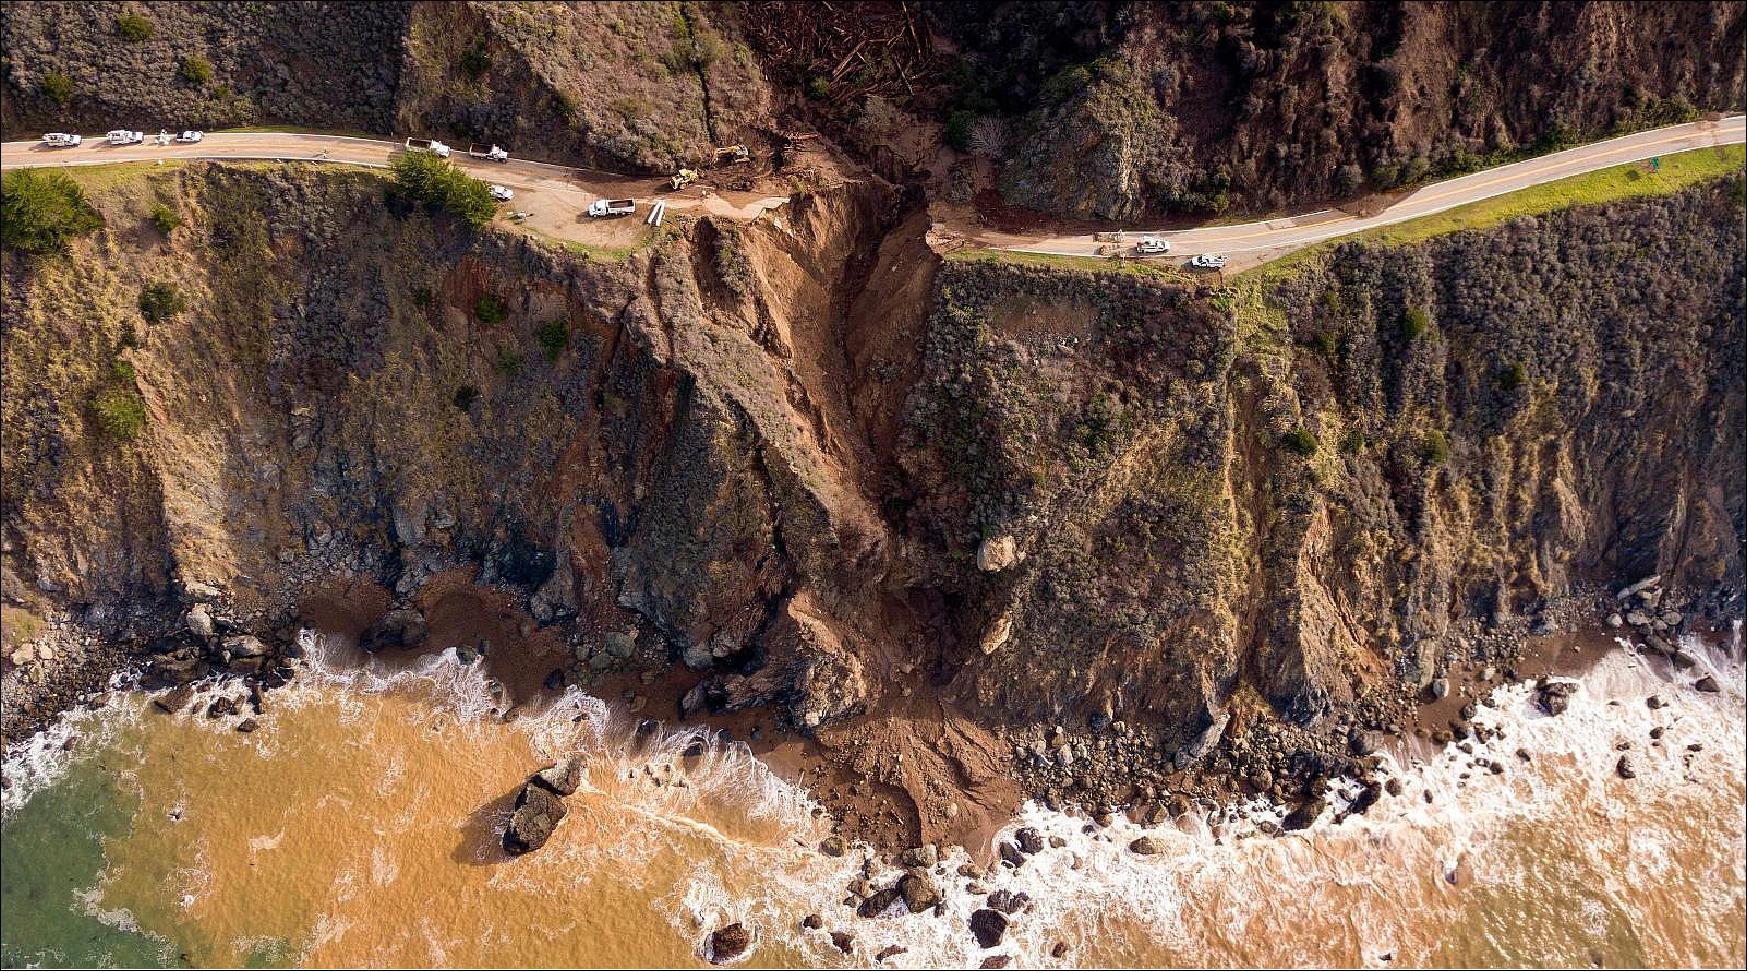 Figure 5: A section of Highway 1 collapsed into the Pacific Ocean near Big Sur, California, on January 31, 2021 (photo credit: Josh Edelson / AFP via Getty Images)